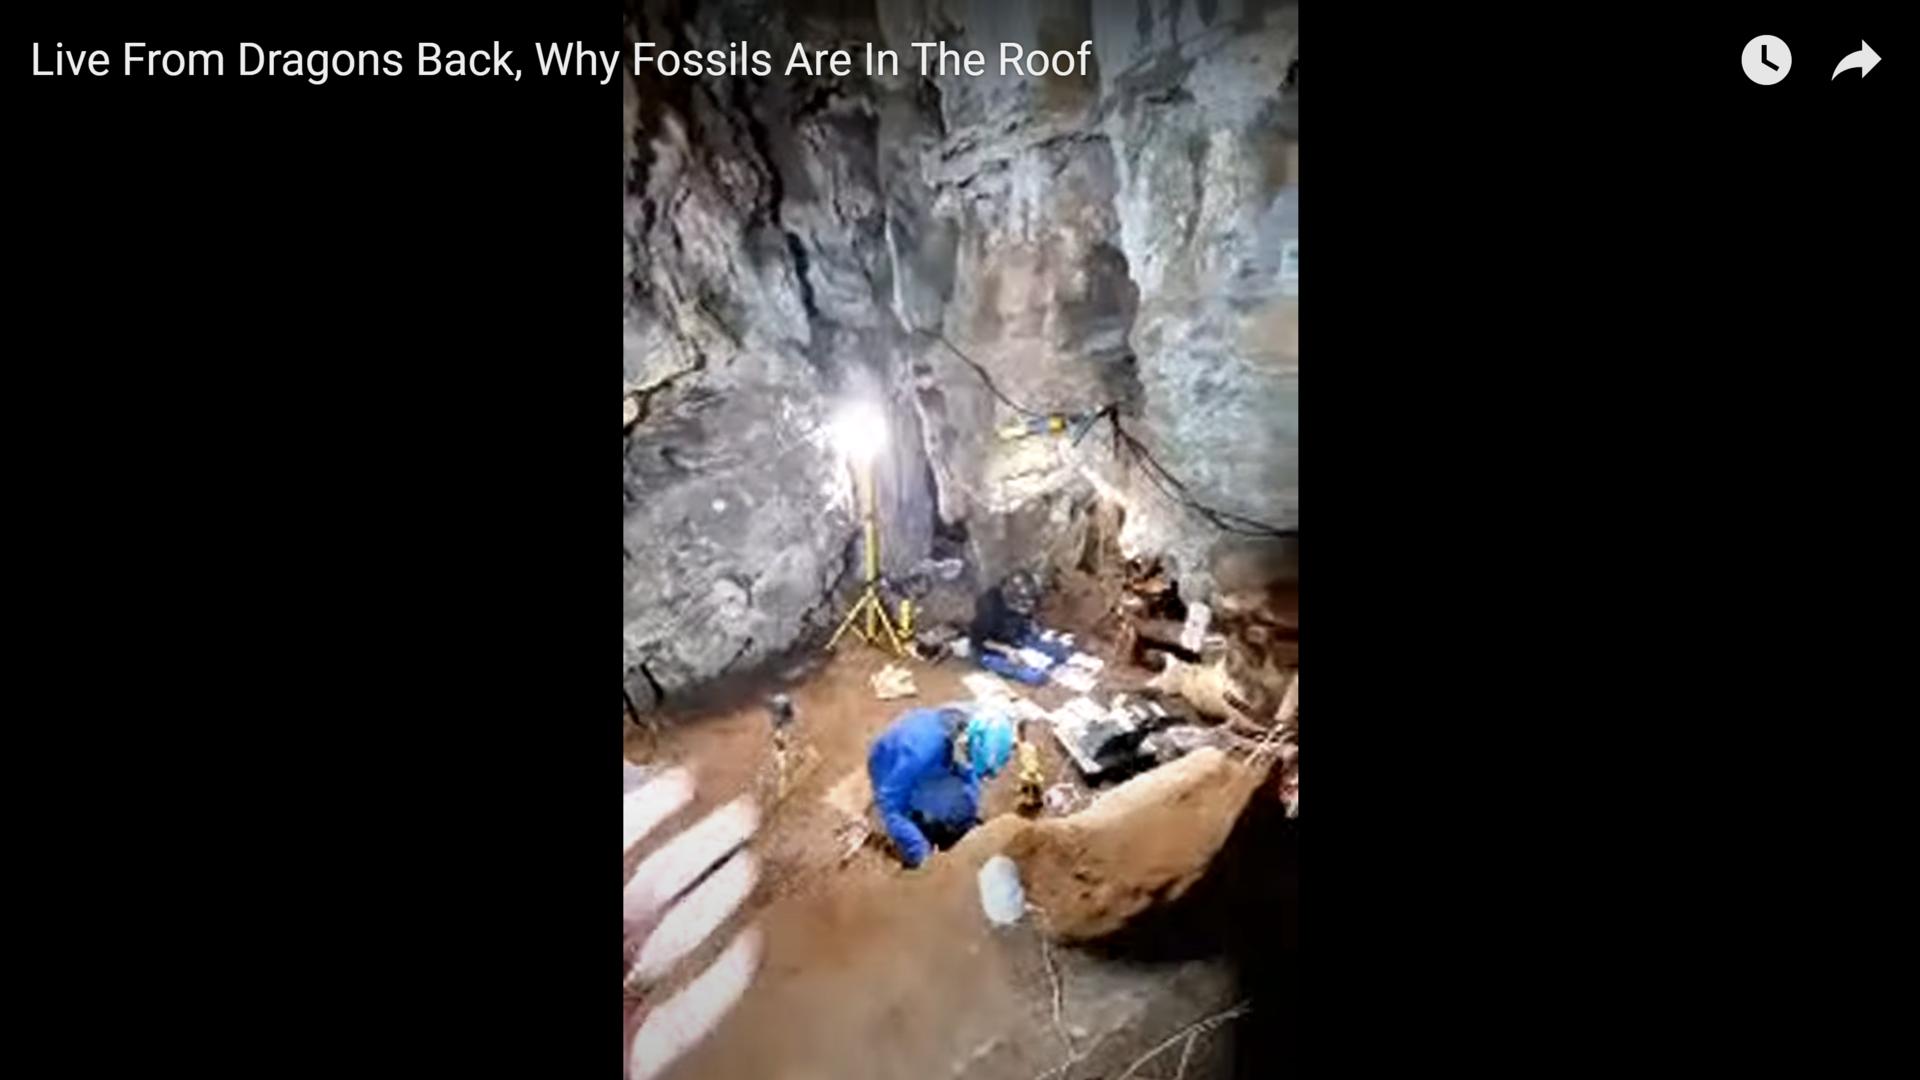 5.2.4 Live from the Rising Star Cave. 4- Live From Dragons Back, Why Fossils Are In The Roof